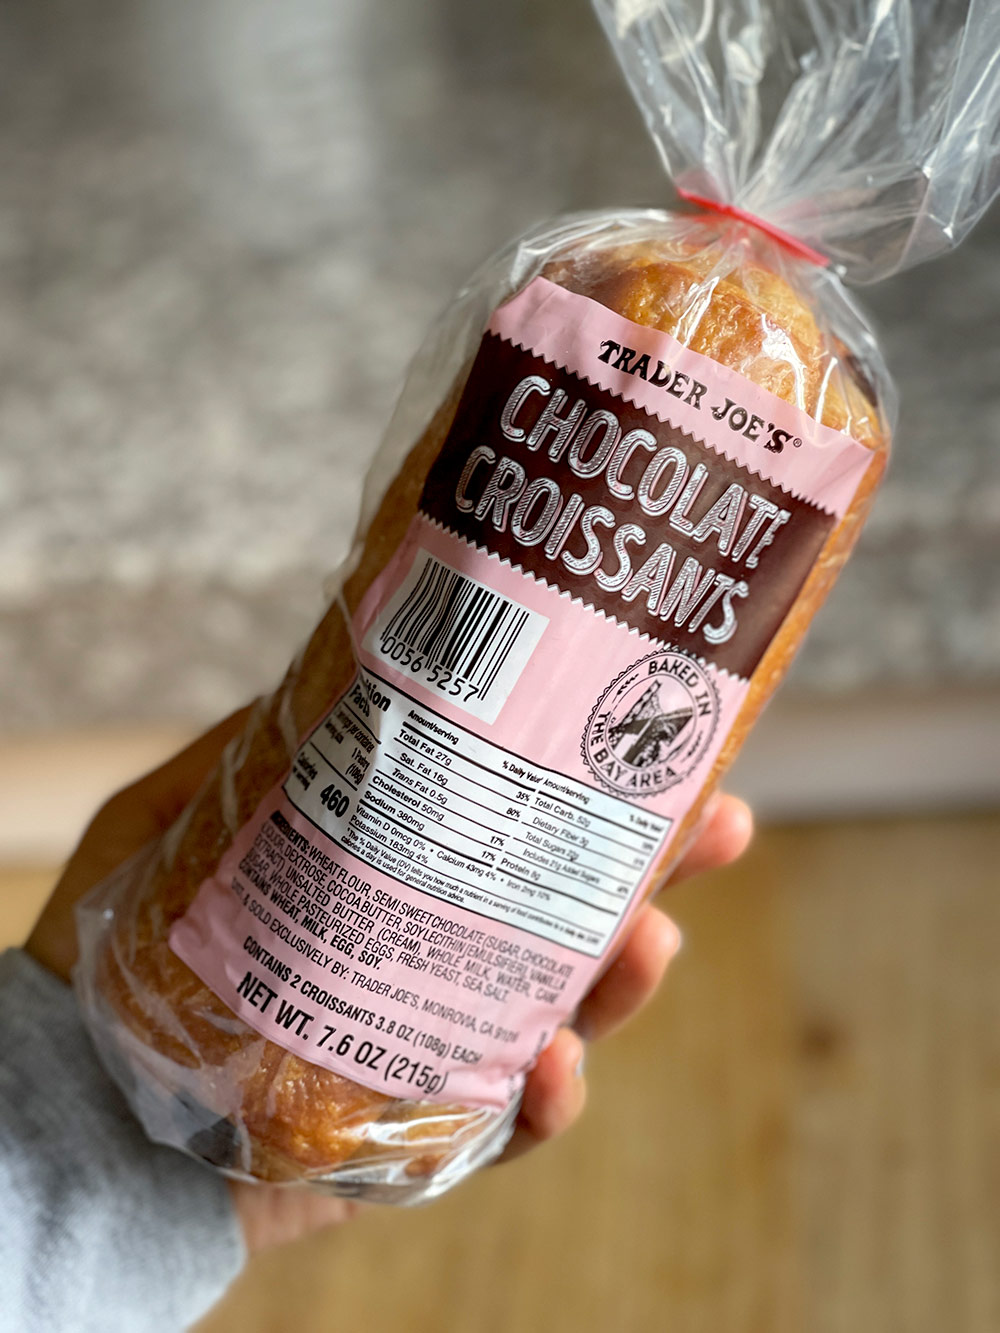  trader joes chocolate croissant